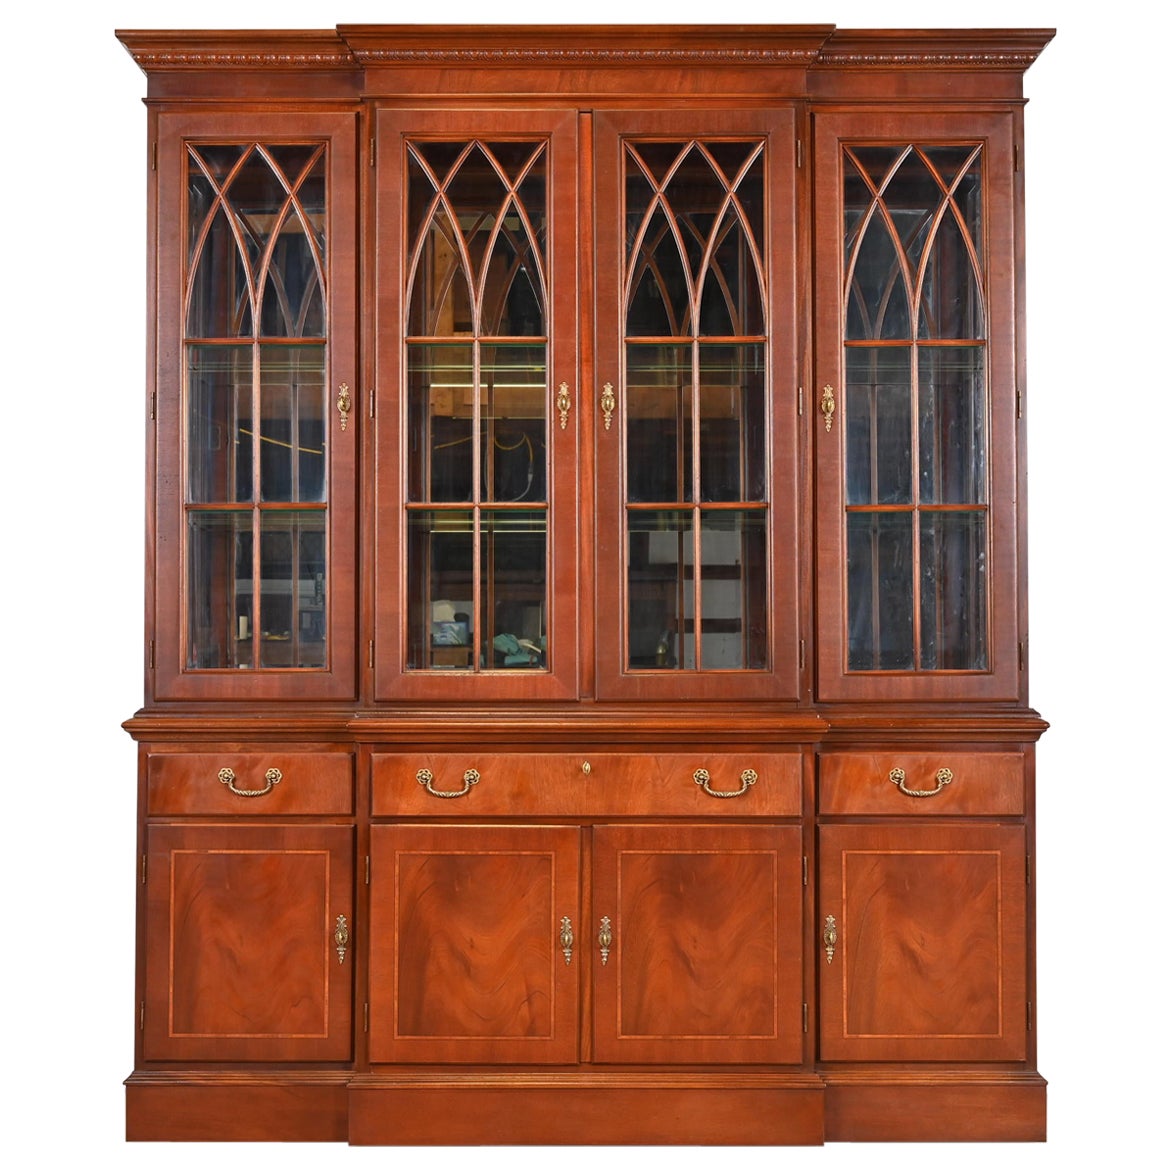 Georgian Inlaid Mahogany Lighted Breakfront Bookcase Cabinet